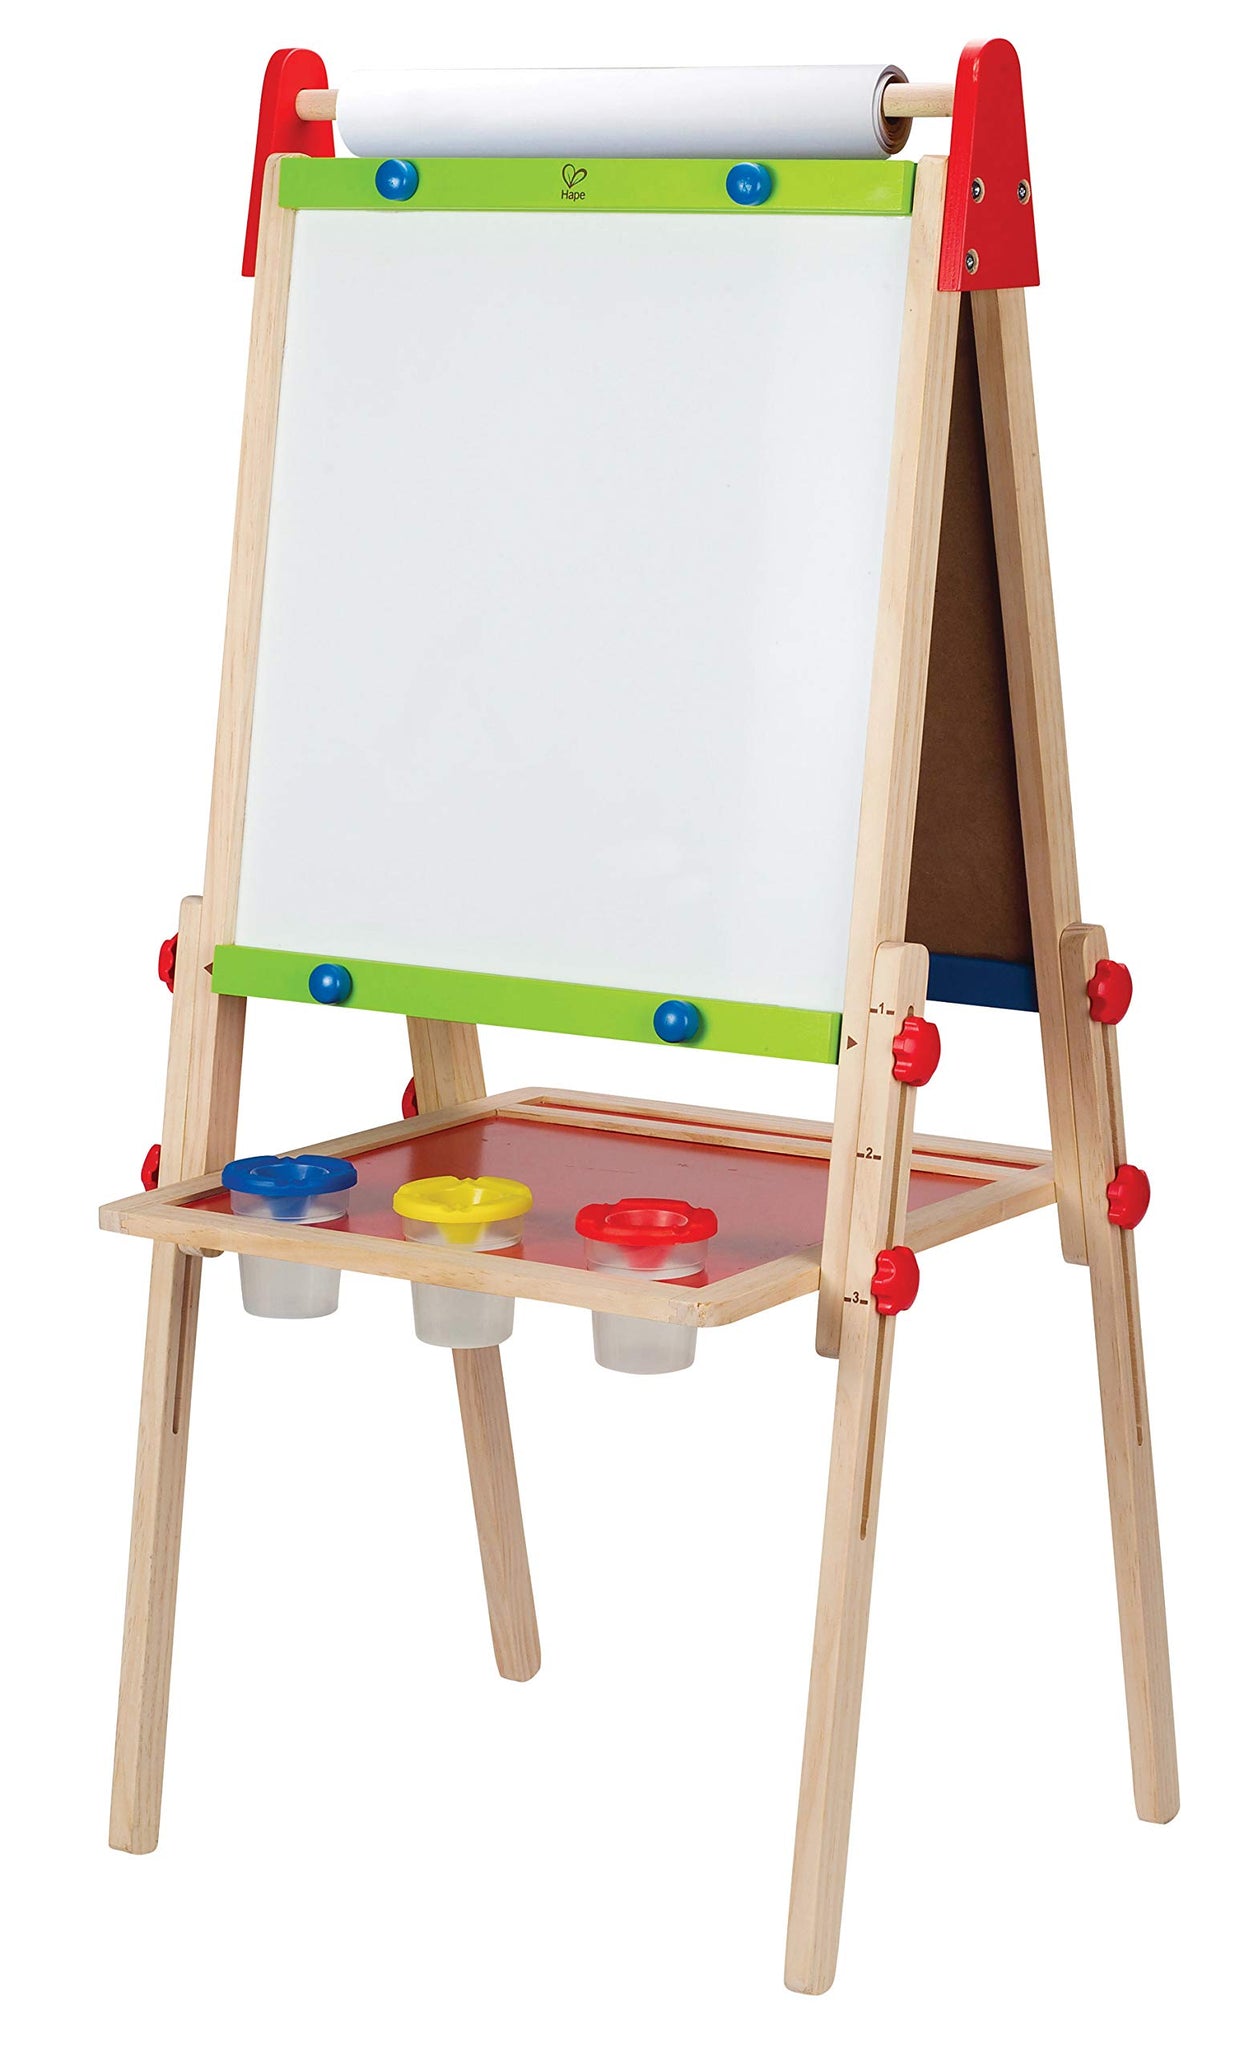 Award Winning Hape All-in-One Wooden Kid's Art Easel with Paper Roll and Accessories Cream, L: 18.9, W: 15.9, H: 41.8 inch